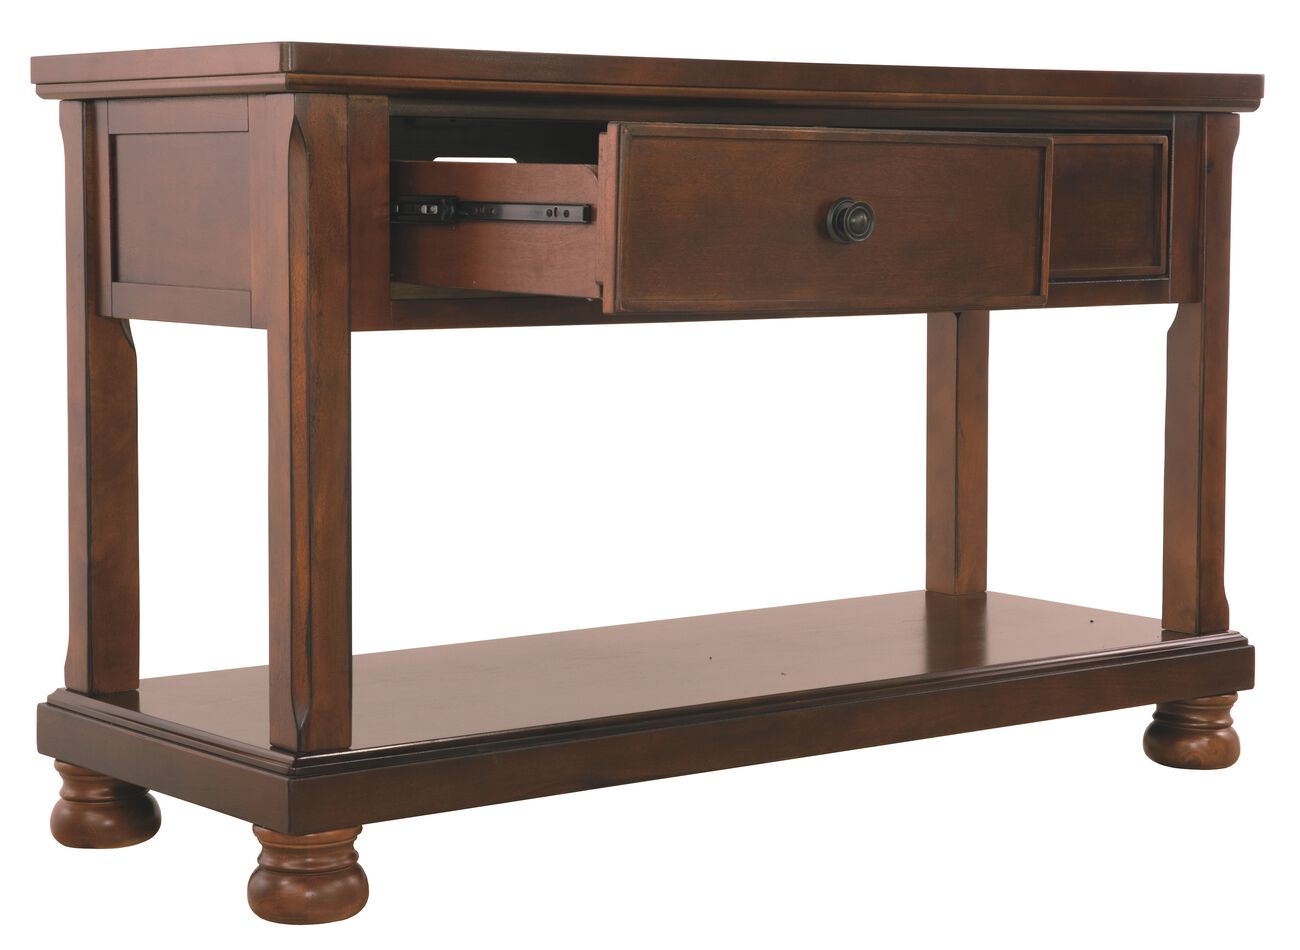 Wooden Console Table with Bun Feet and Storage Space, Brown